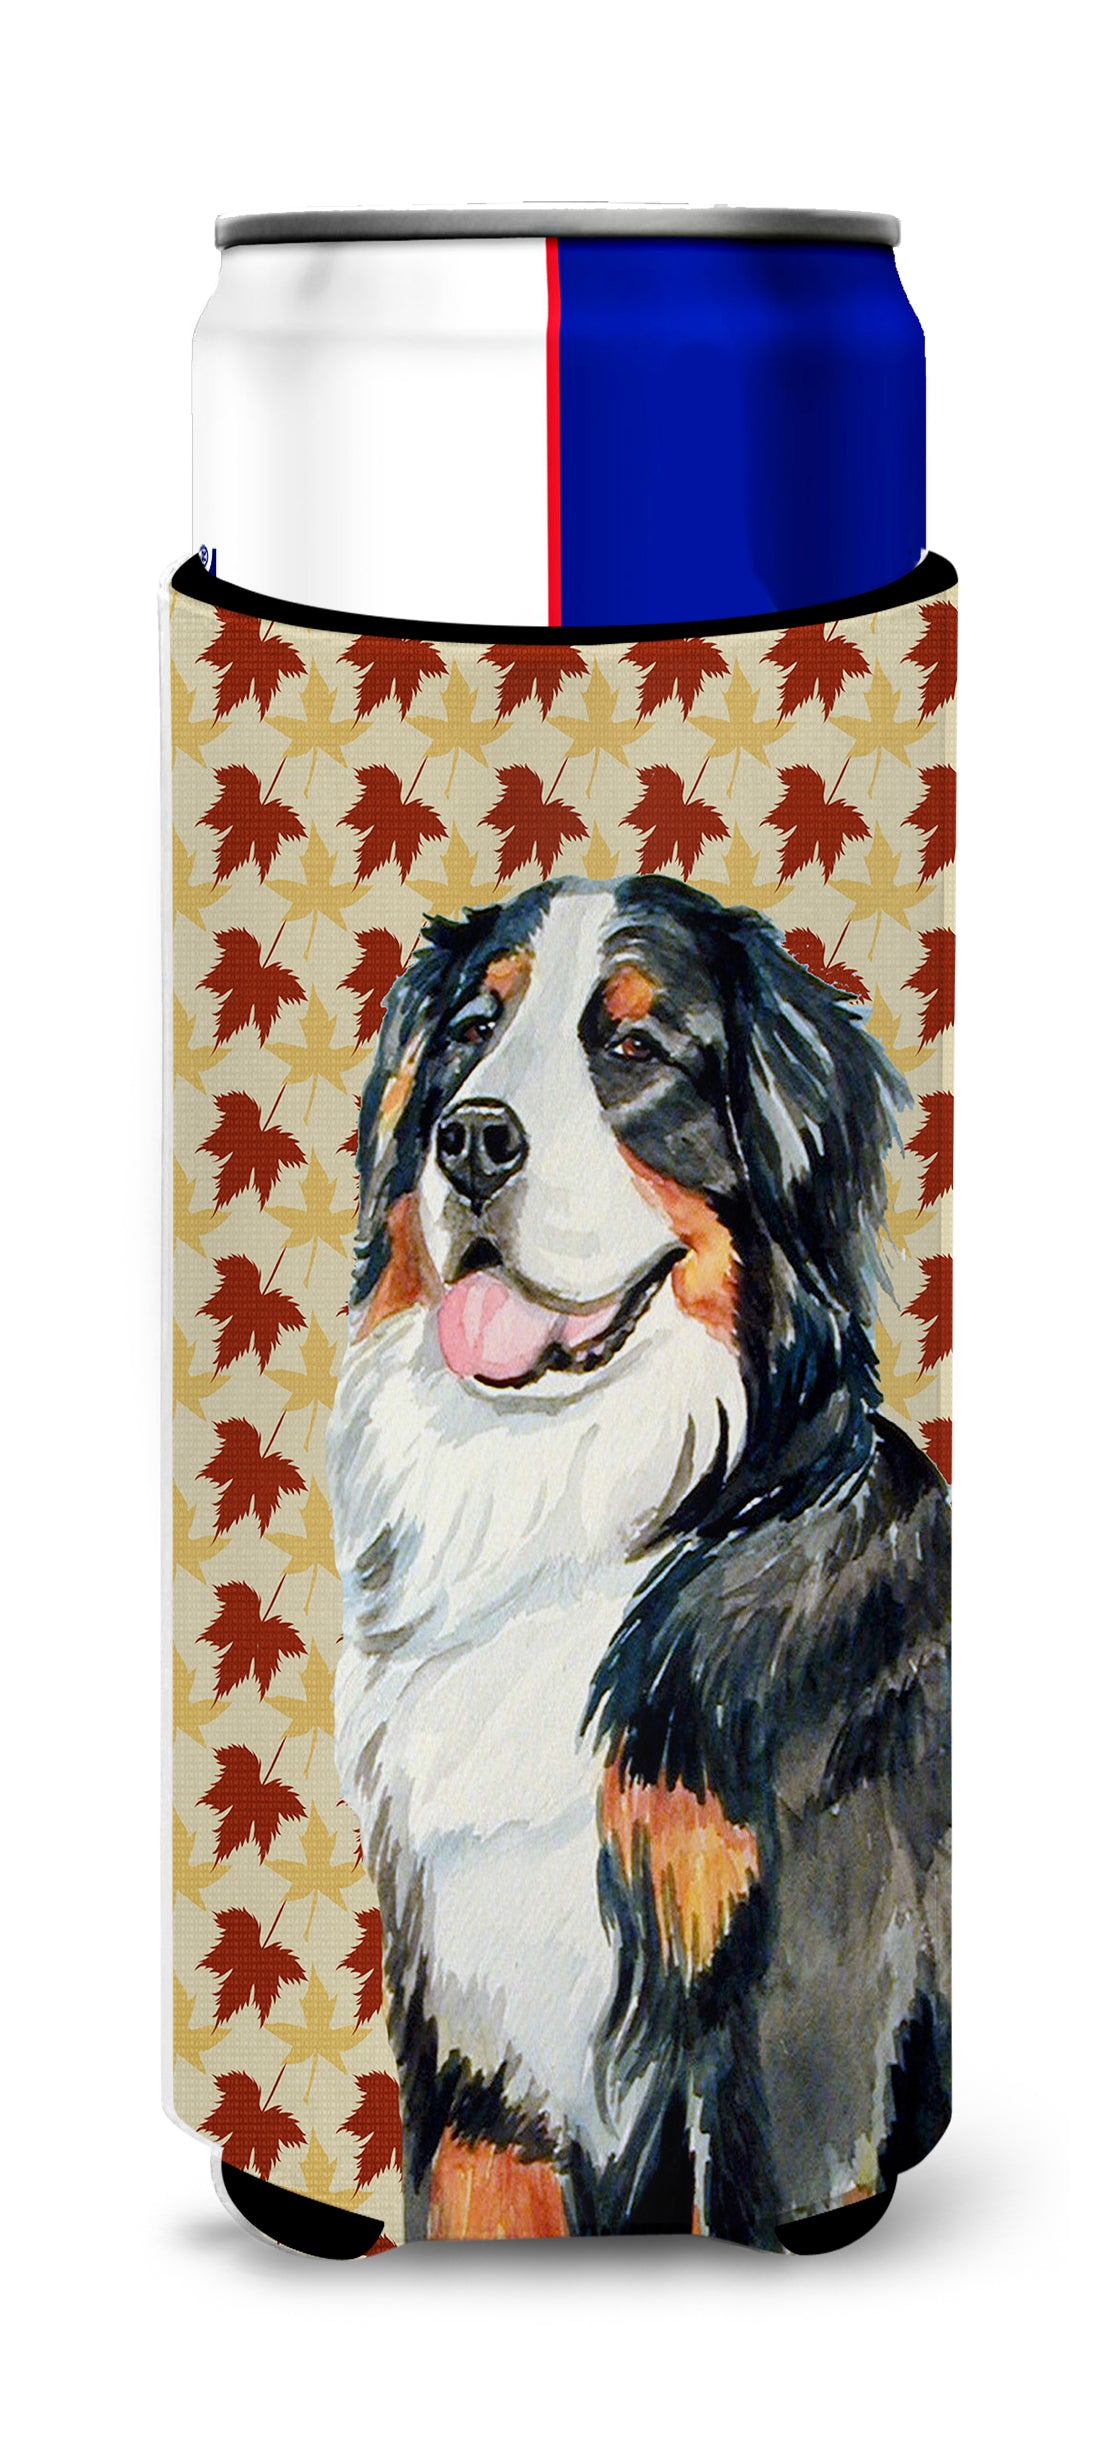 Bernese Mountain Dog Fall Leaves Portrait Ultra Beverage Insulators for slim cans LH9109MUK.